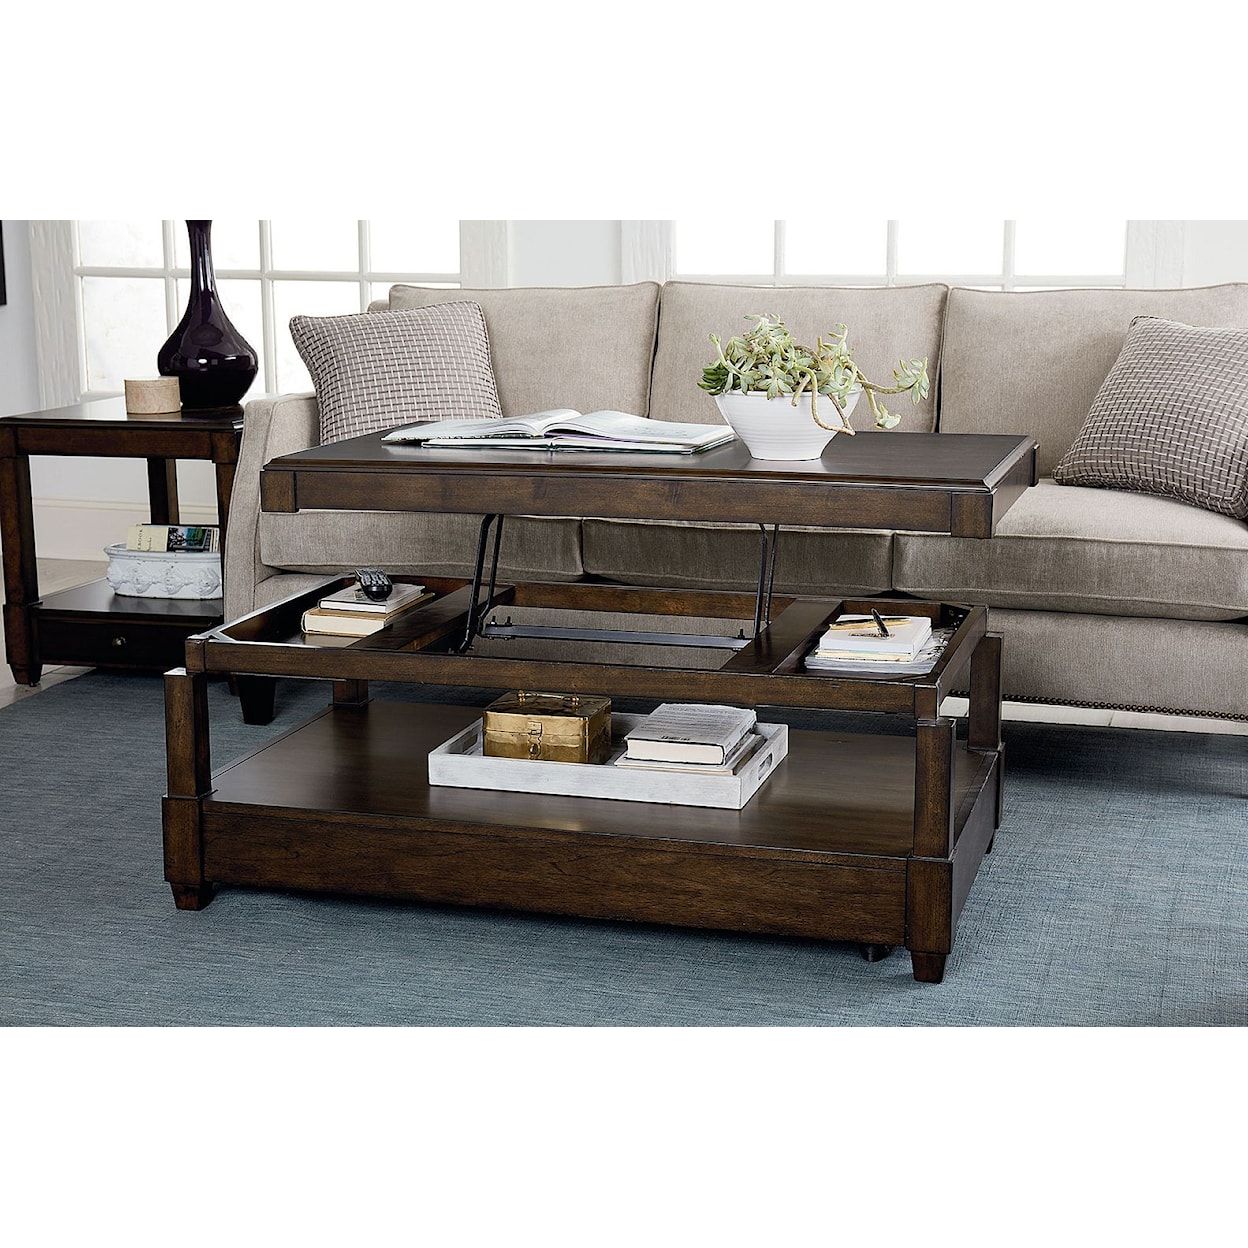 Hammary Helensburgh Rectangular Lift-Top Cocktail Table